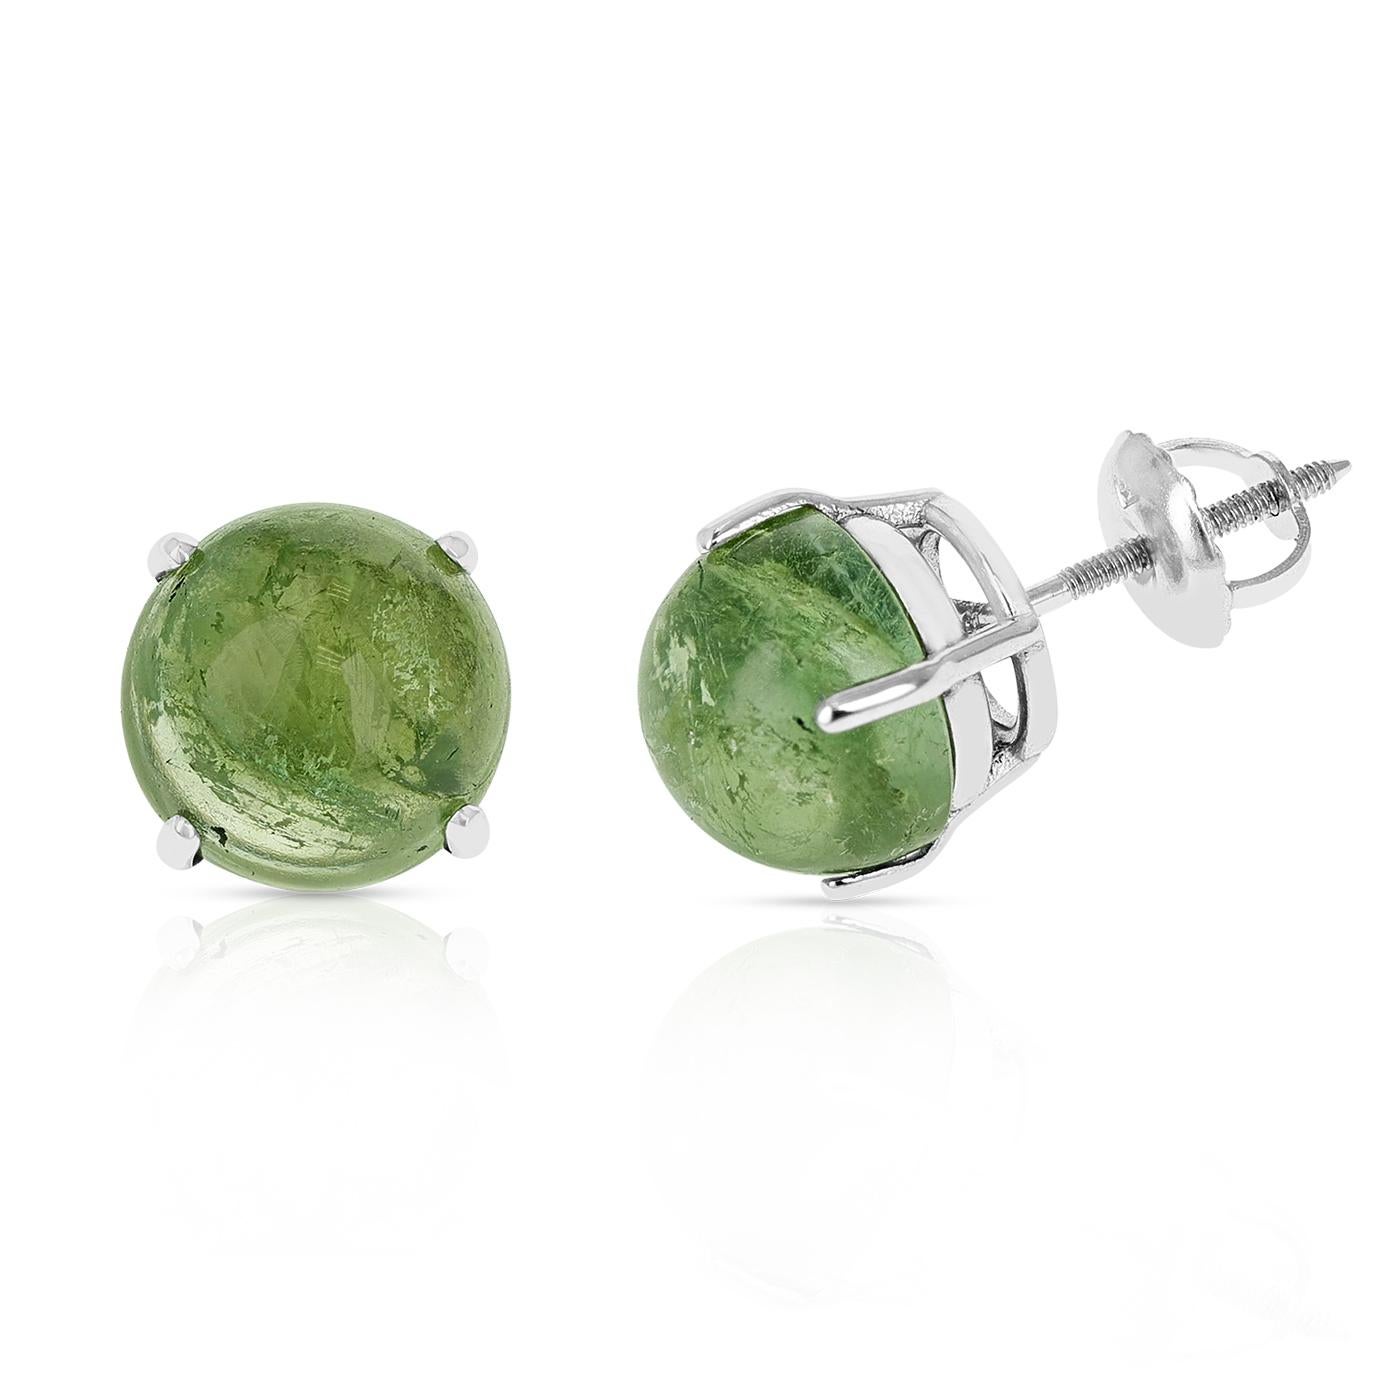 A pair of 7MM Green Tourmaline Round Cabochon Stud Earrings made in 14 Karat White Gold. The total stone weight ranges from approximately 2.95 - 4.34 carats.